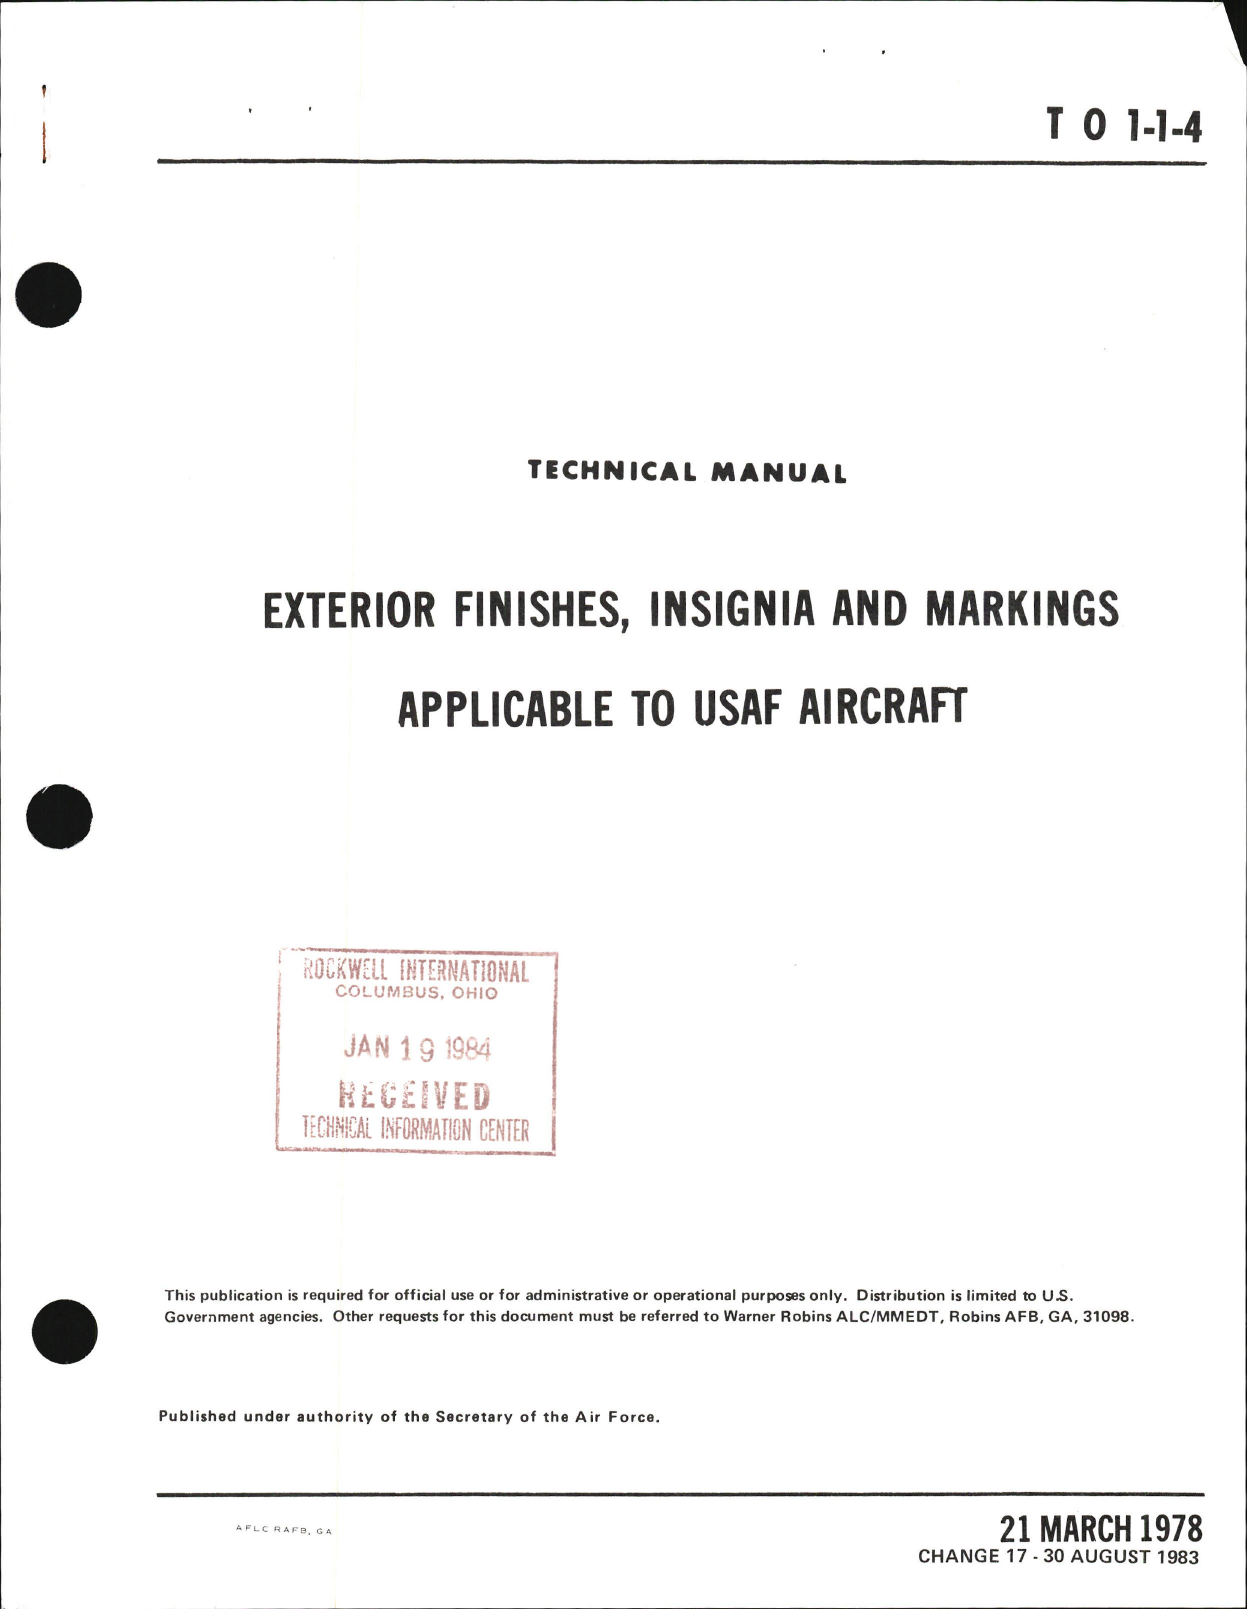 Sample page 1 from AirCorps Library document: Exterior Finishes, Insignia and Markings for USAF Aircraft - Change - 17